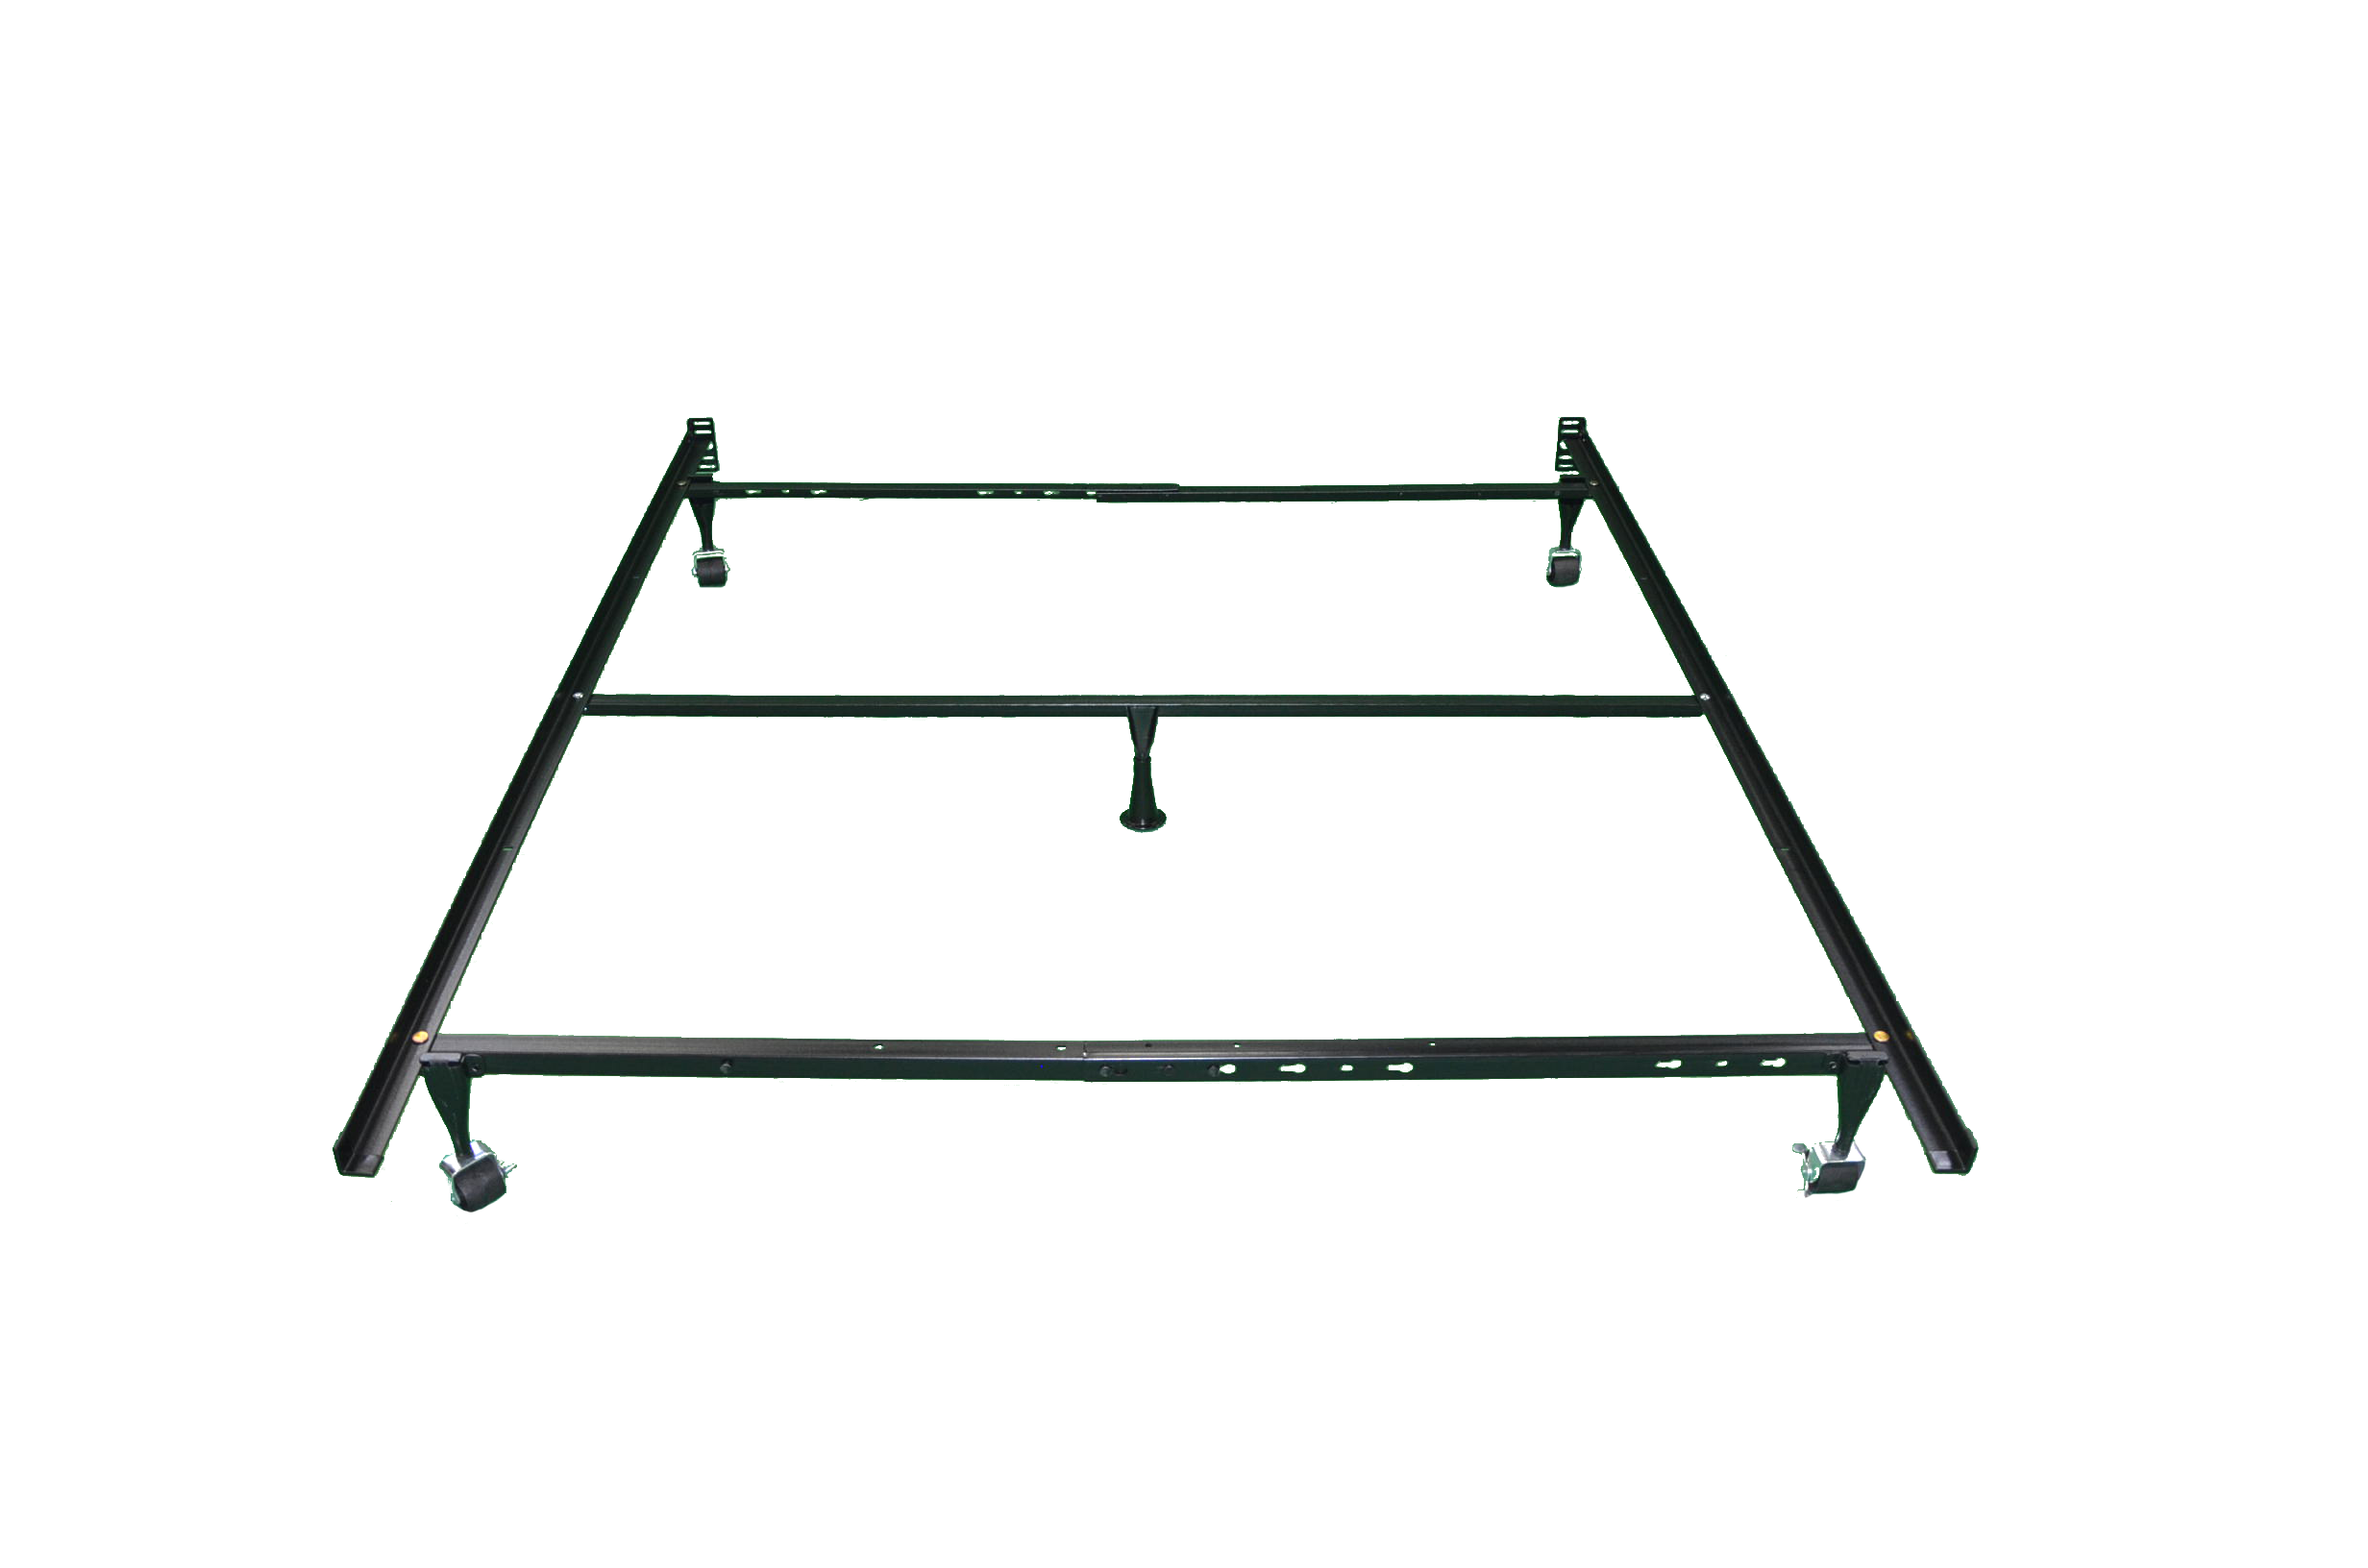 Nuans Classic Frame with Cross Support